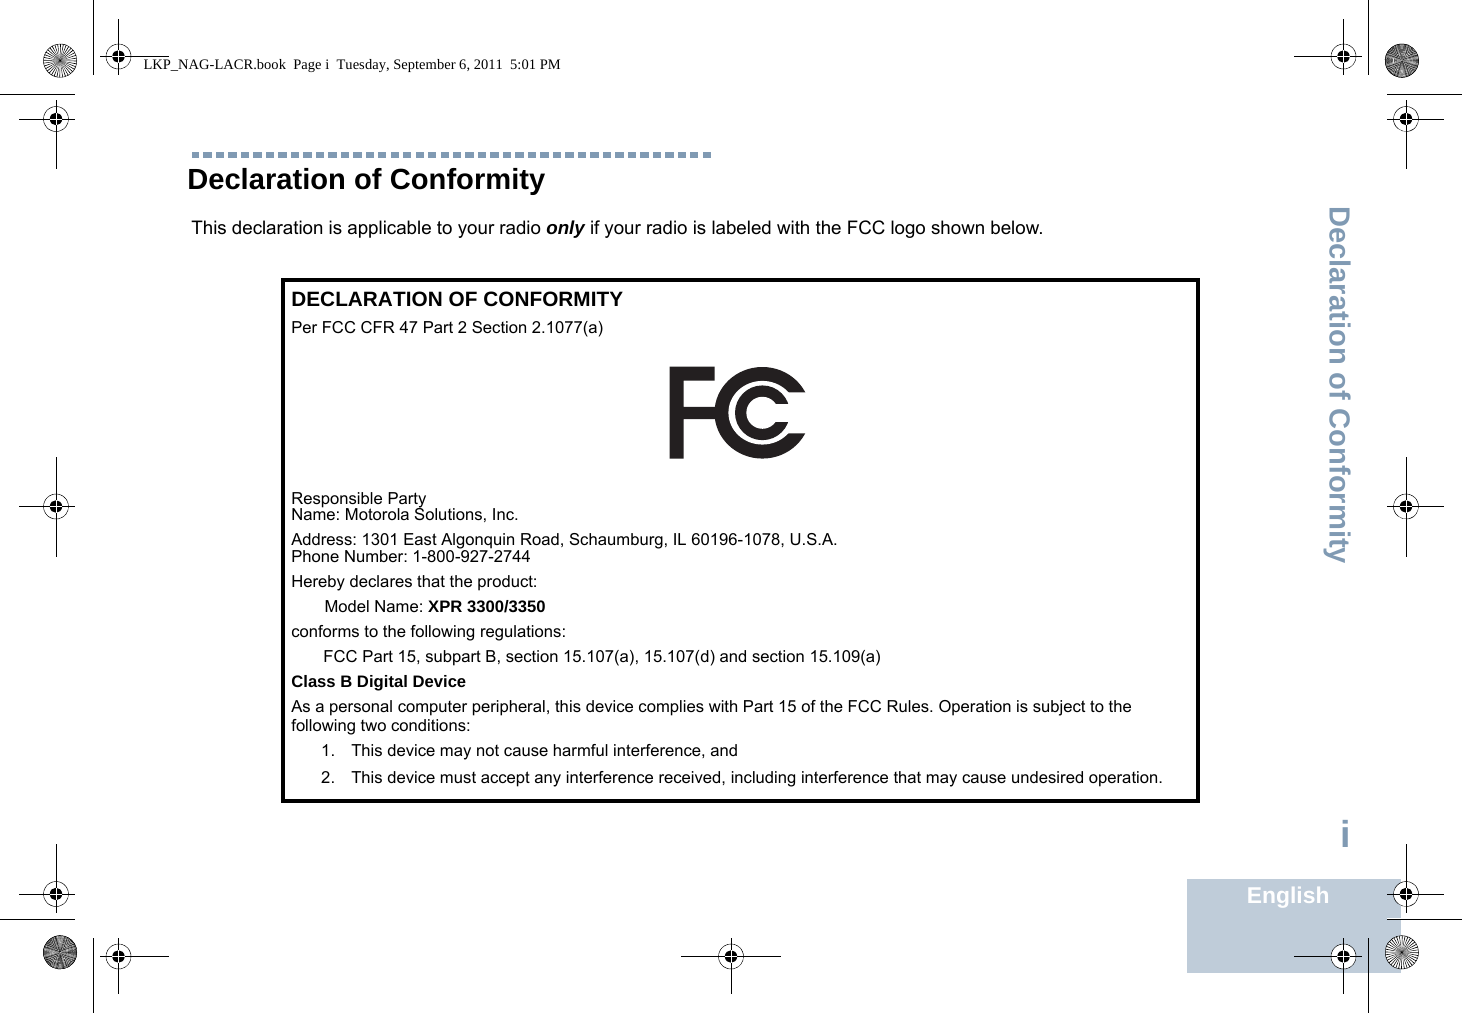 Declaration of ConformityEnglishiDeclaration of ConformityThis declaration is applicable to your radio only if your radio is labeled with the FCC logo shown below.DECLARATION OF CONFORMITYPer FCC CFR 47 Part 2 Section 2.1077(a)Responsible Party Name: Motorola Solutions, Inc.Address: 1301 East Algonquin Road, Schaumburg, IL 60196-1078, U.S.A.Phone Number: 1-800-927-2744Hereby declares that the product:Model Name: XPR 3300/3350conforms to the following regulations:FCC Part 15, subpart B, section 15.107(a), 15.107(d) and section 15.109(a)Class B Digital DeviceAs a personal computer peripheral, this device complies with Part 15 of the FCC Rules. Operation is subject to the following two conditions:1. This device may not cause harmful interference, and 2. This device must accept any interference received, including interference that may cause undesired operation.LKP_NAG-LACR.book  Page i  Tuesday, September 6, 2011  5:01 PM